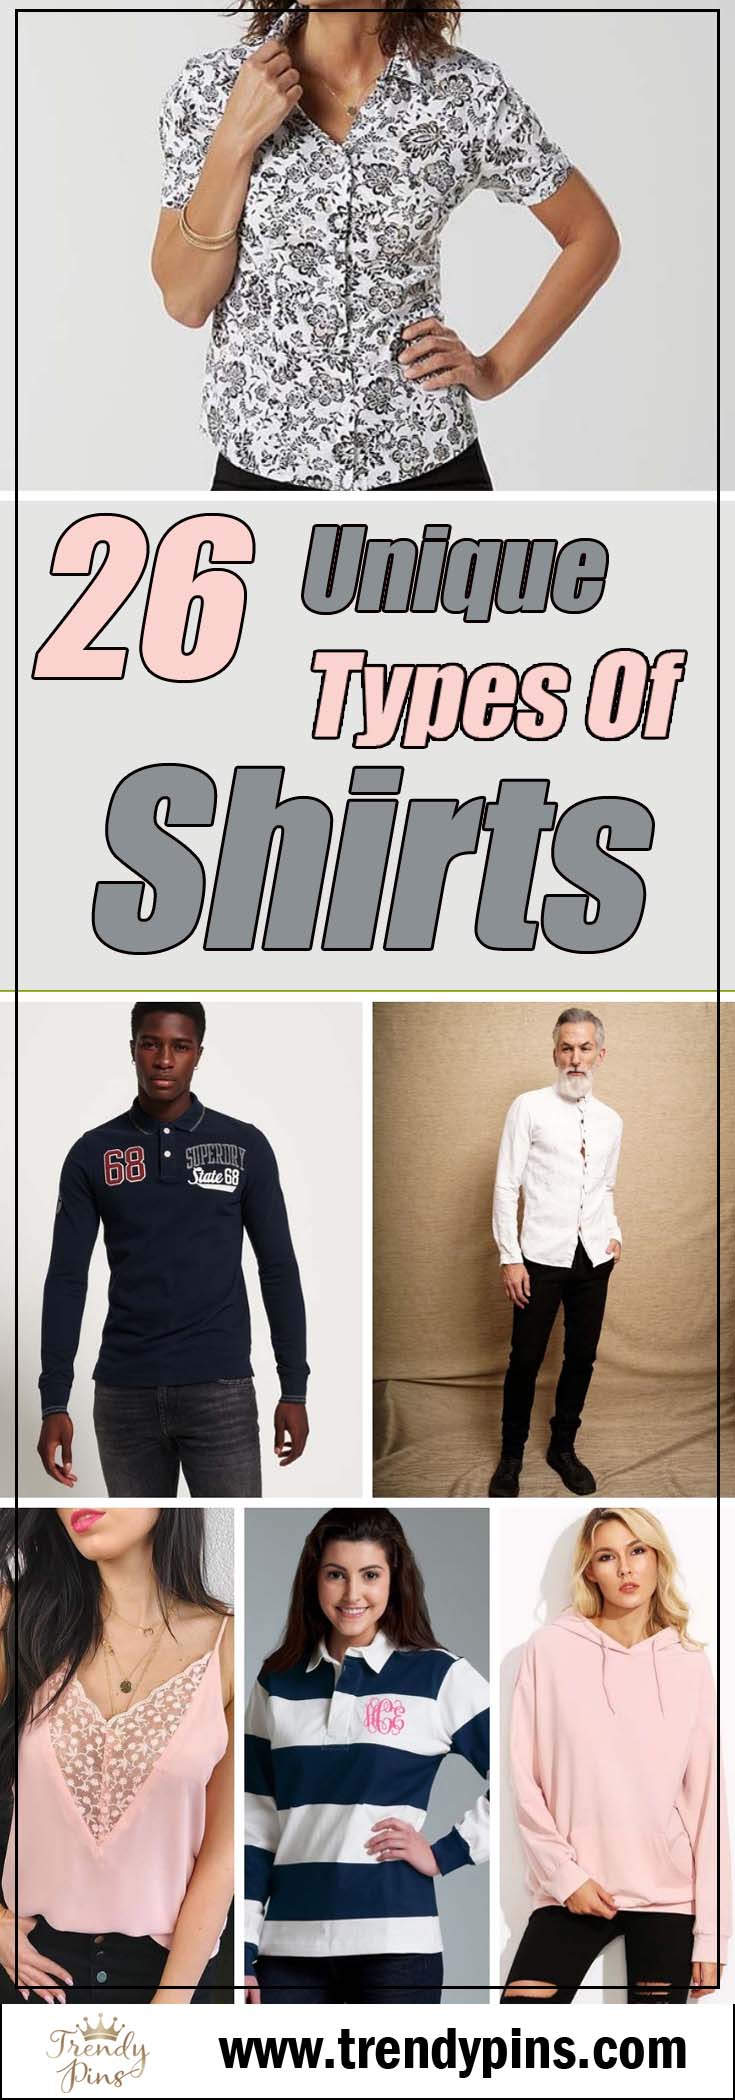 26 unique types of shirts to wear at all occasions #shirts #fashion #trendypins